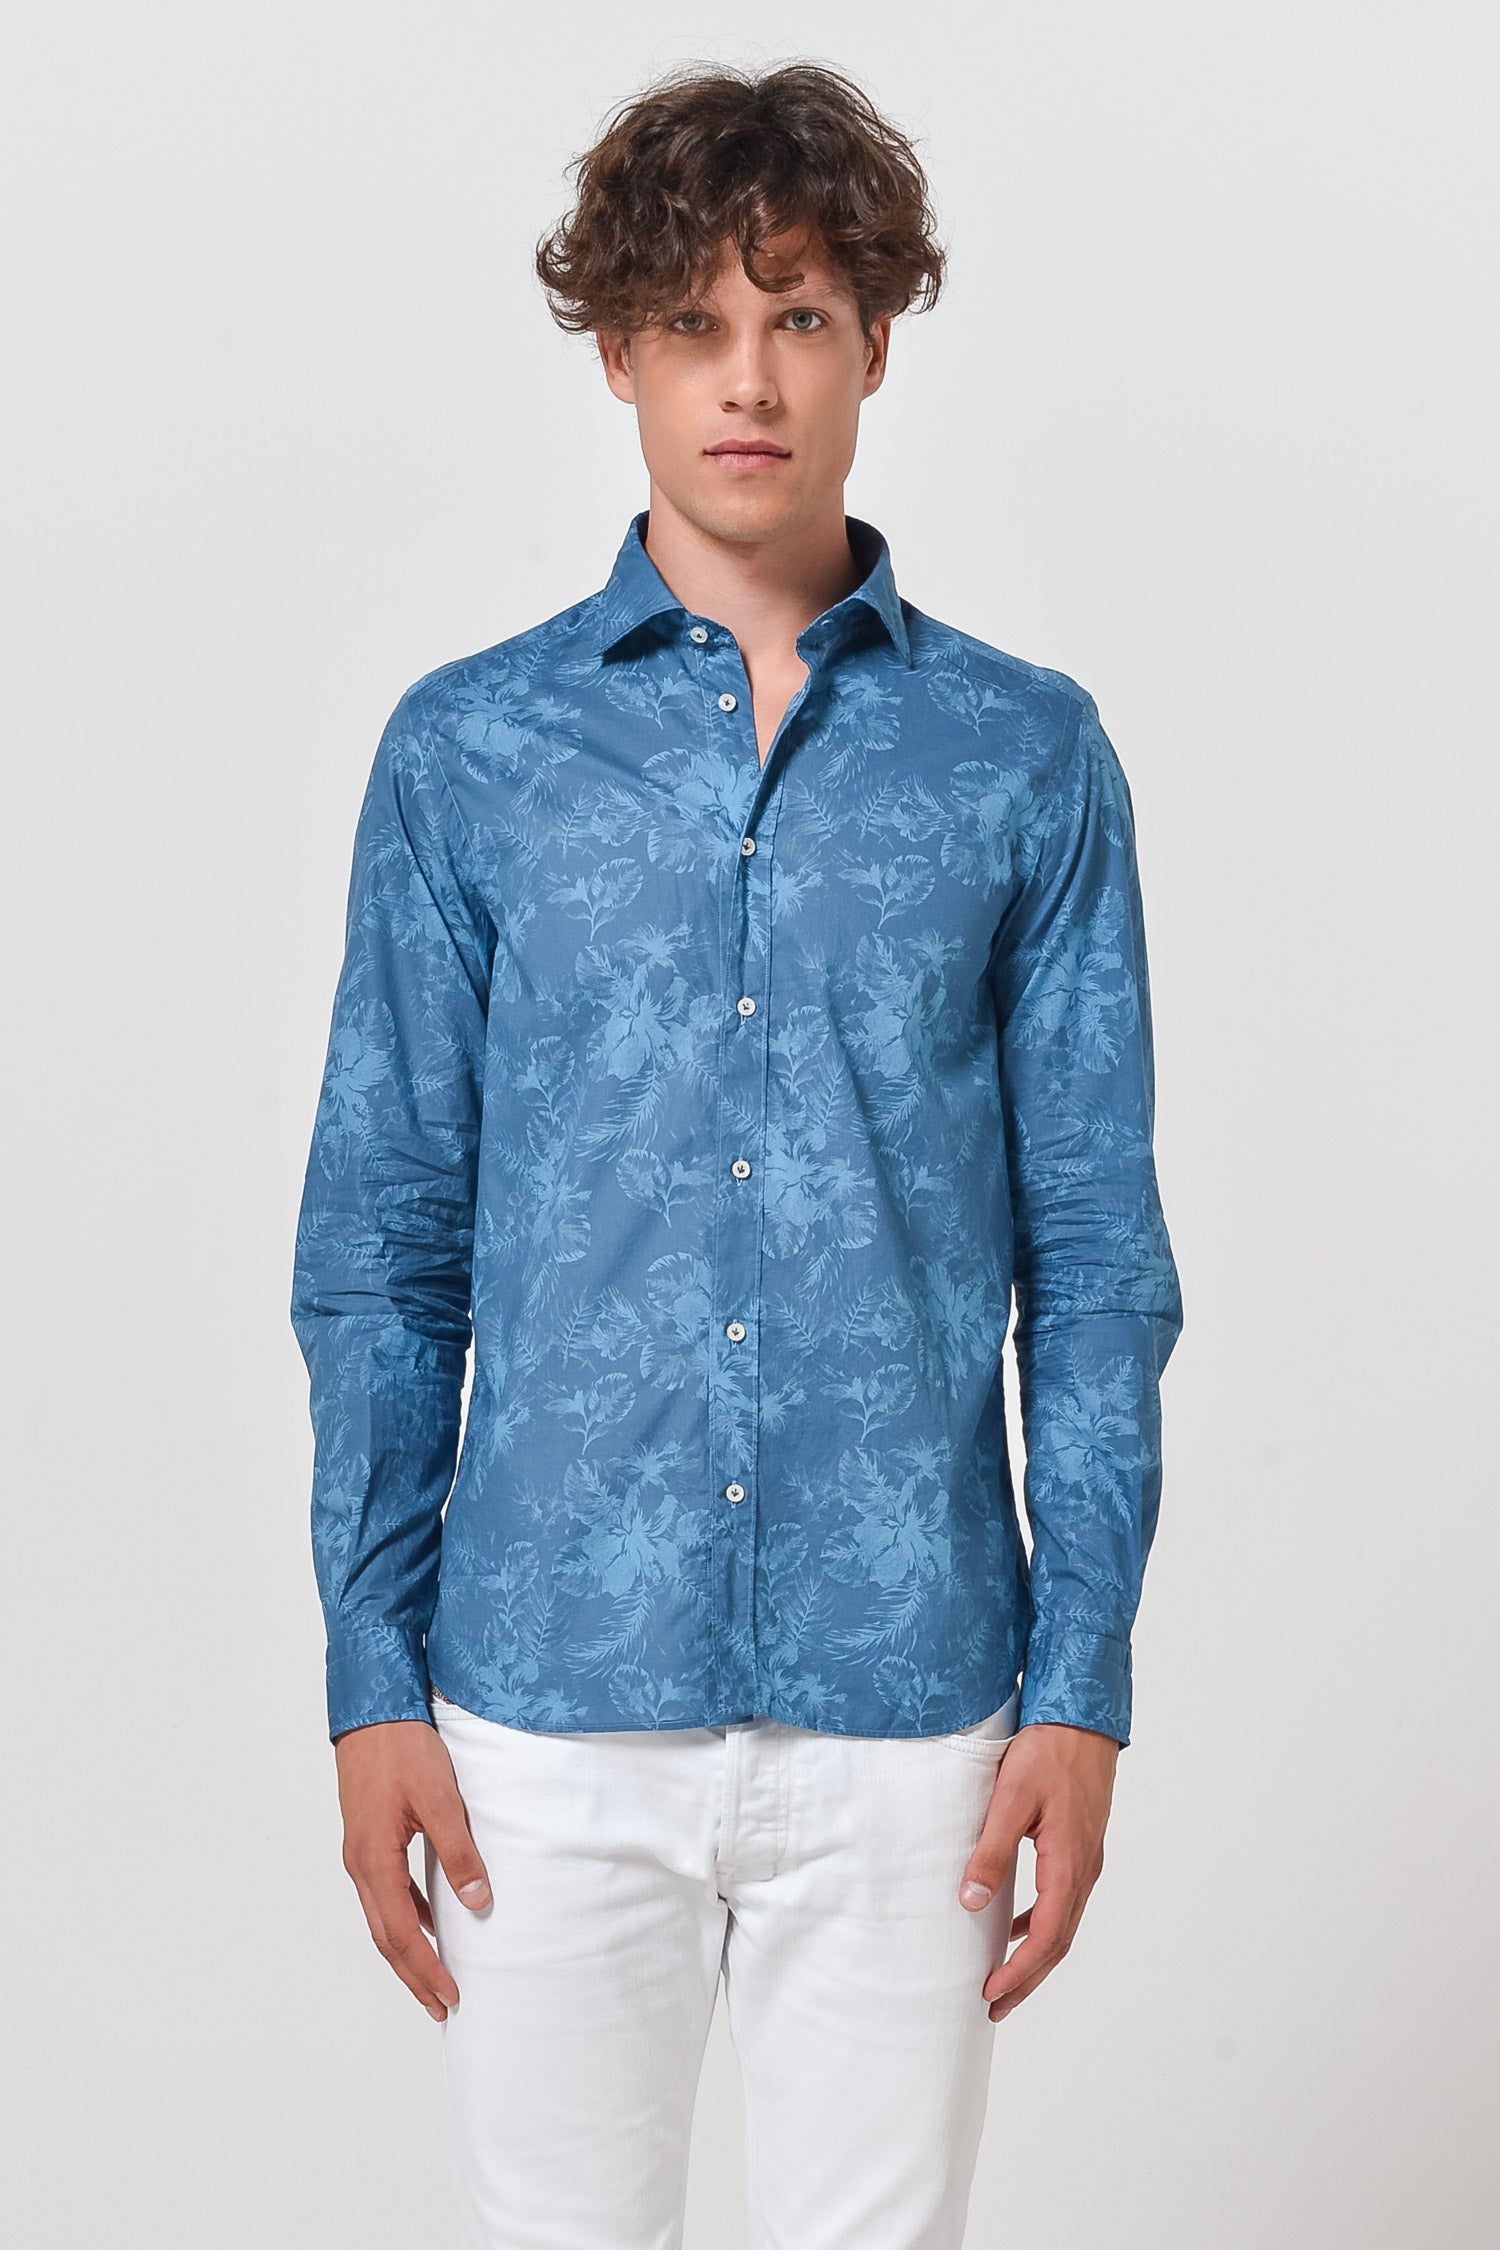 Voile Shirt in Hibiscus Pattern Print - Shirts